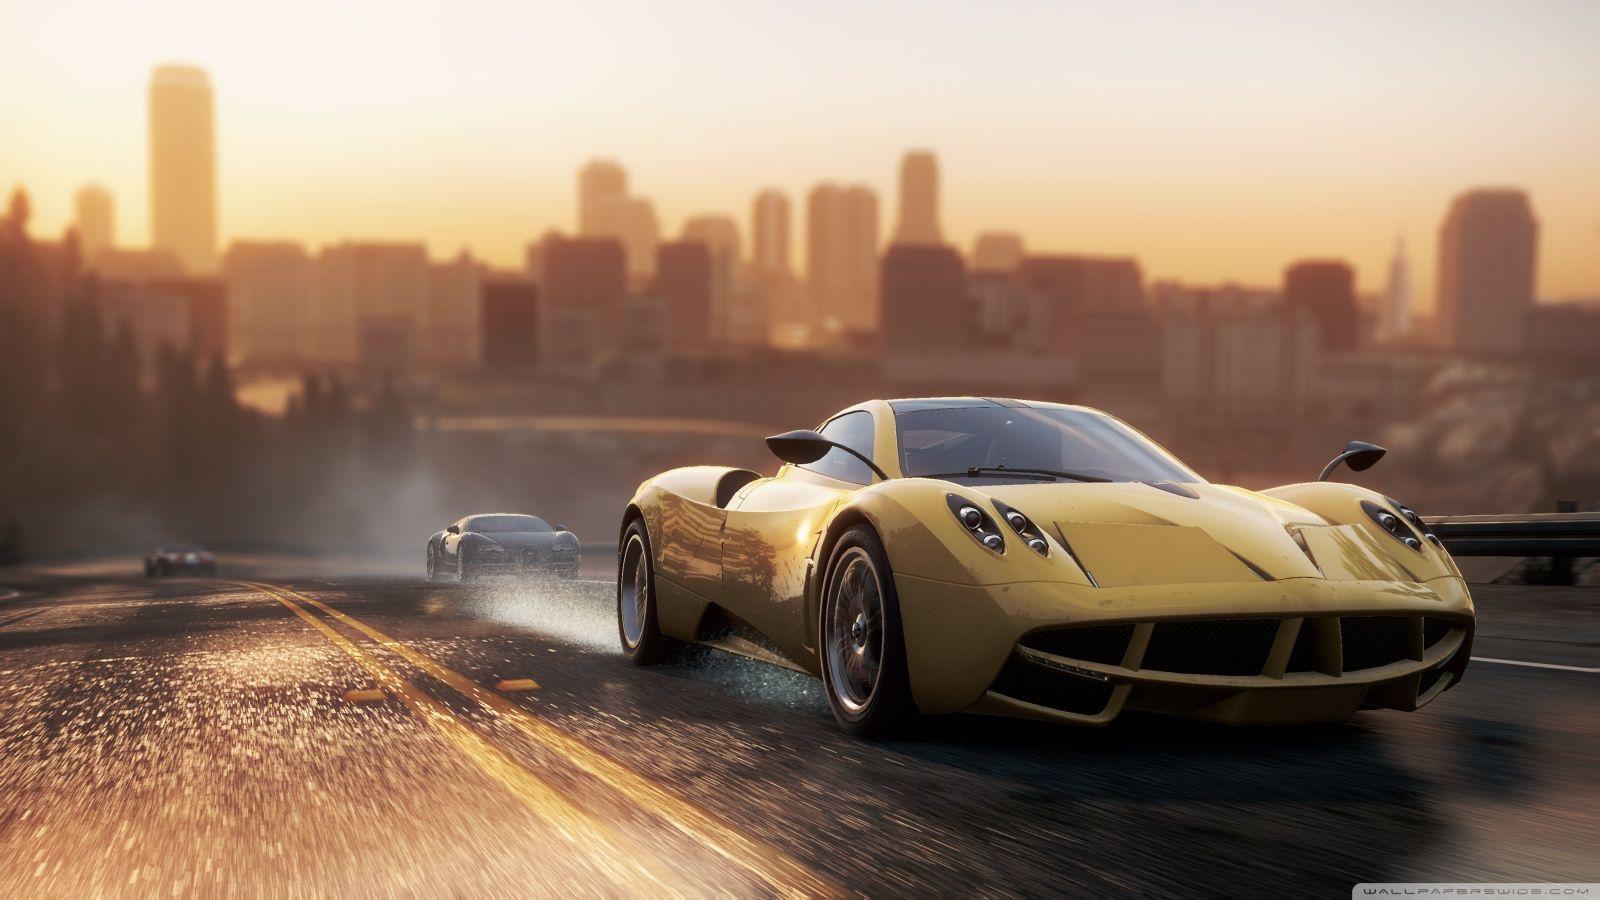 Video Game Need For Speed: Most Wanted 4k Ultra HD Wallpaper by DavutG